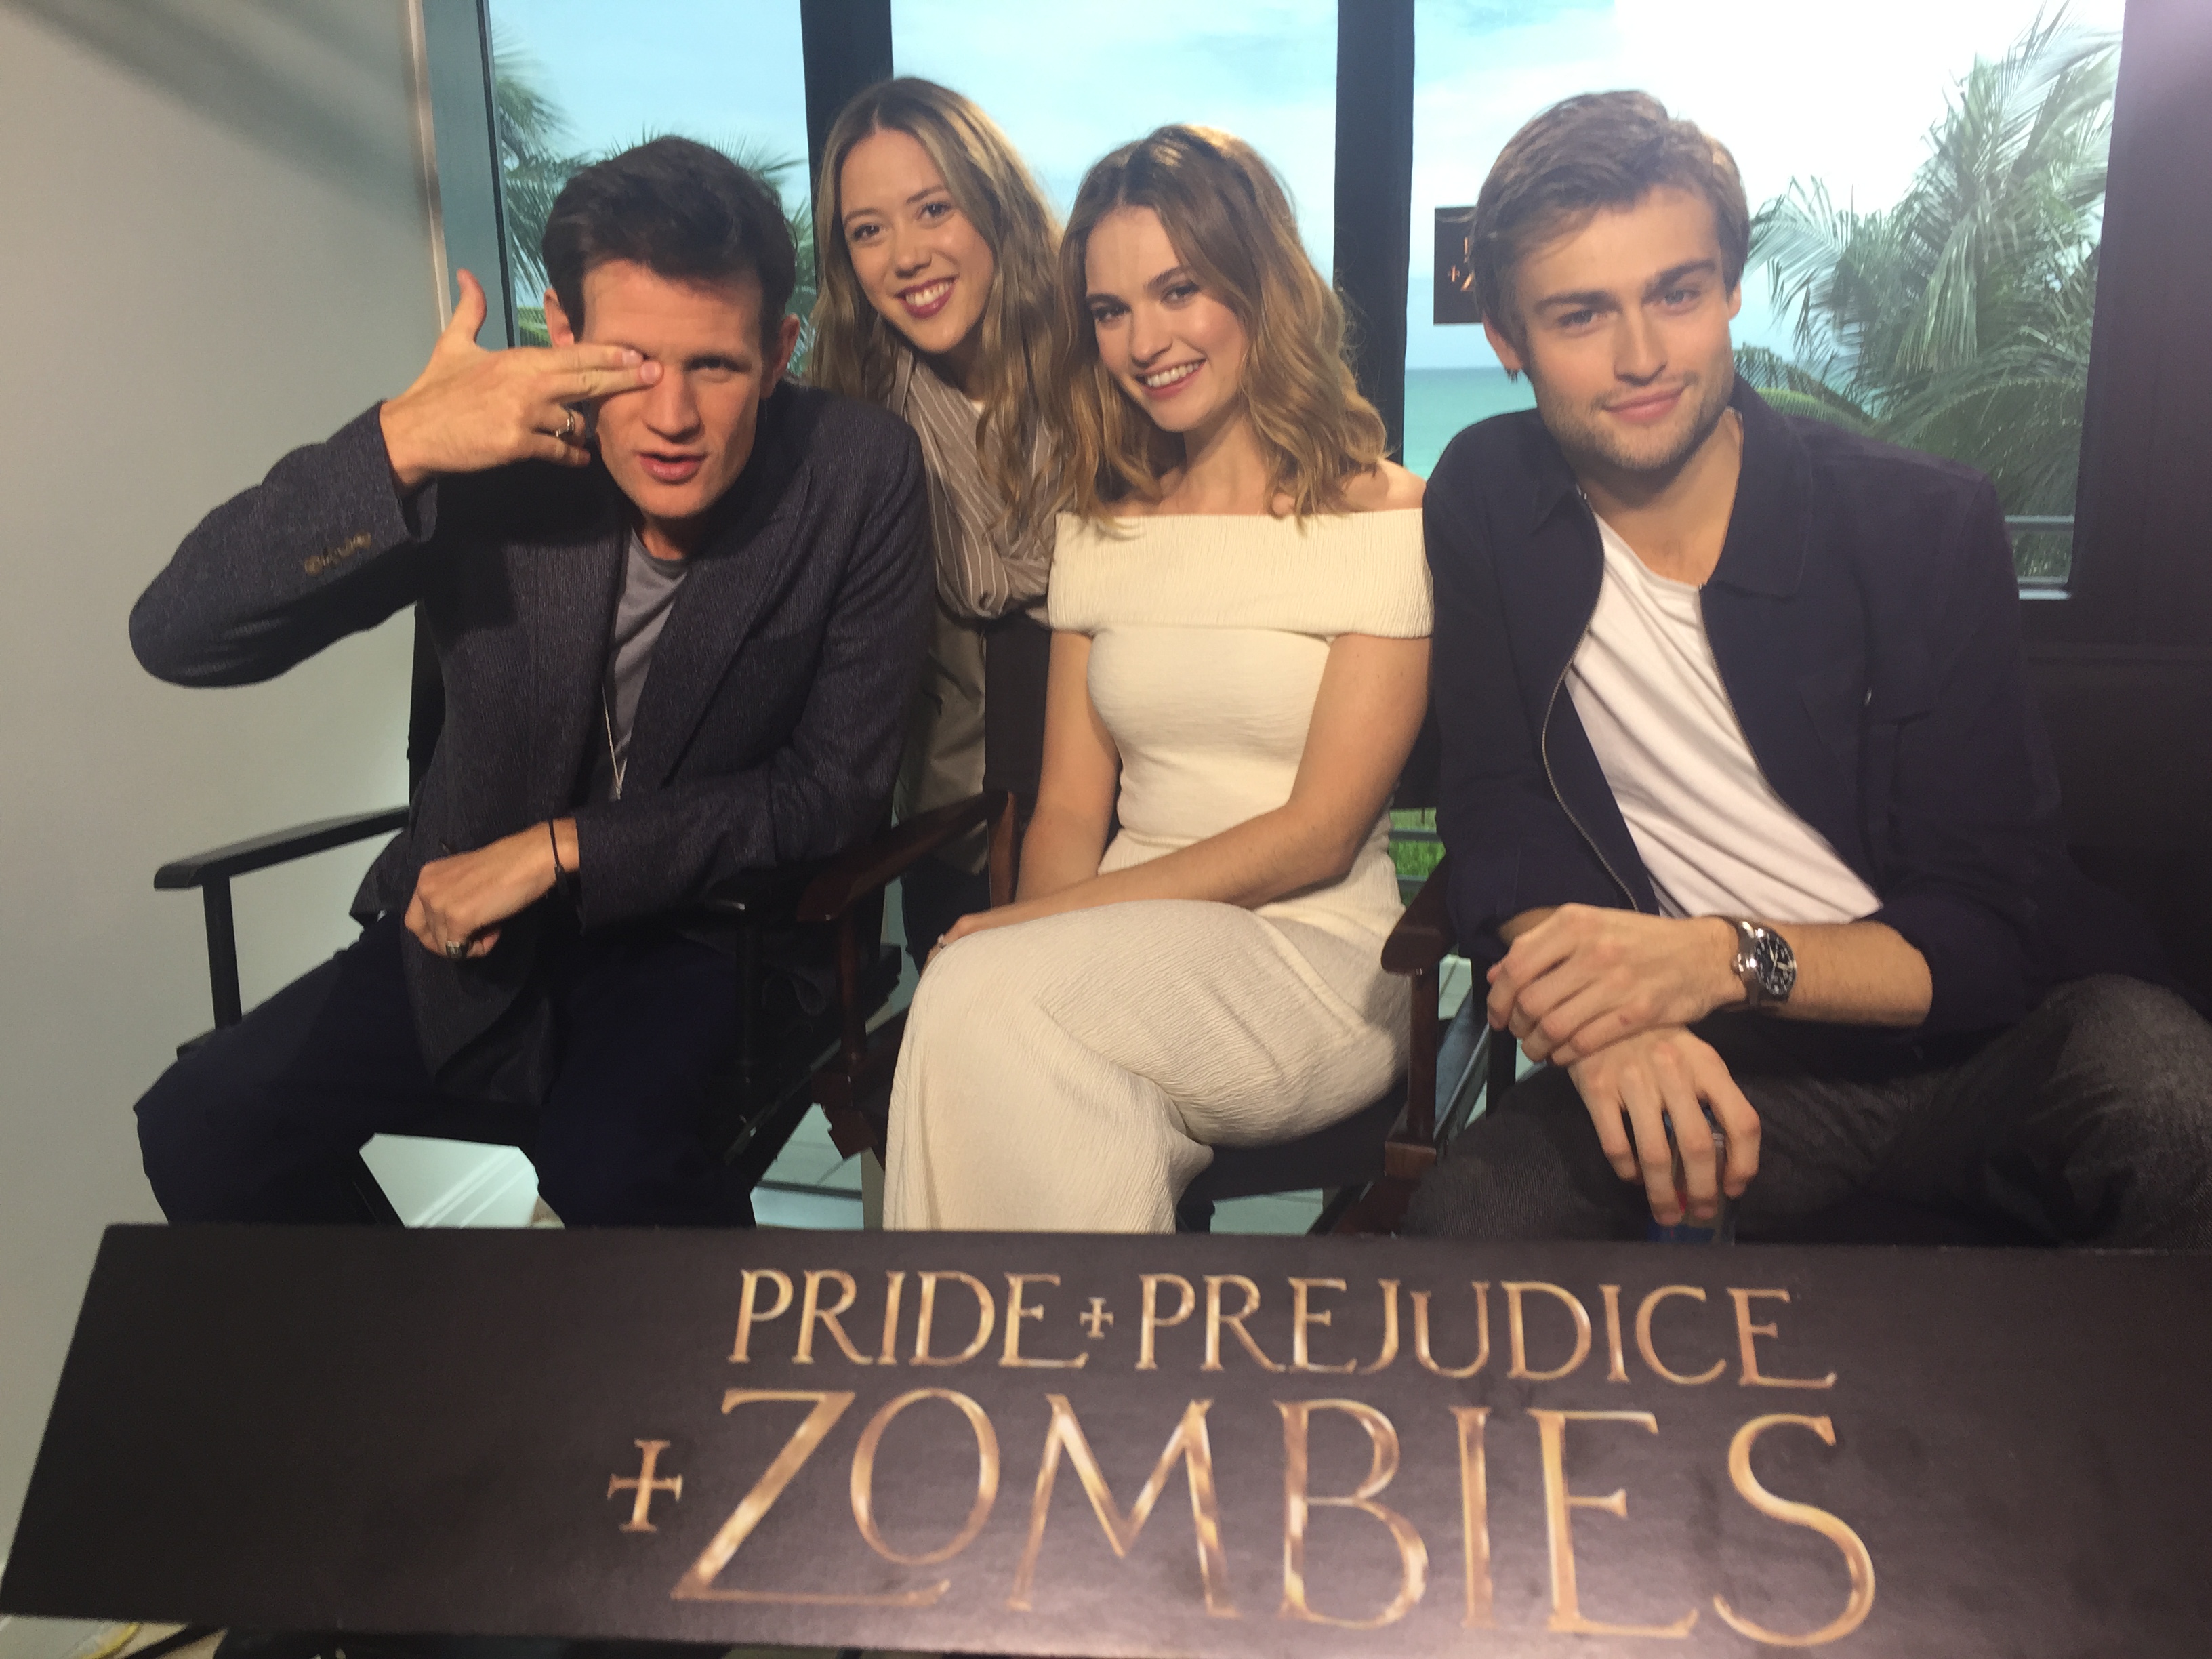 “What’s ñ?” Pride, Prejudice and Zombies.”